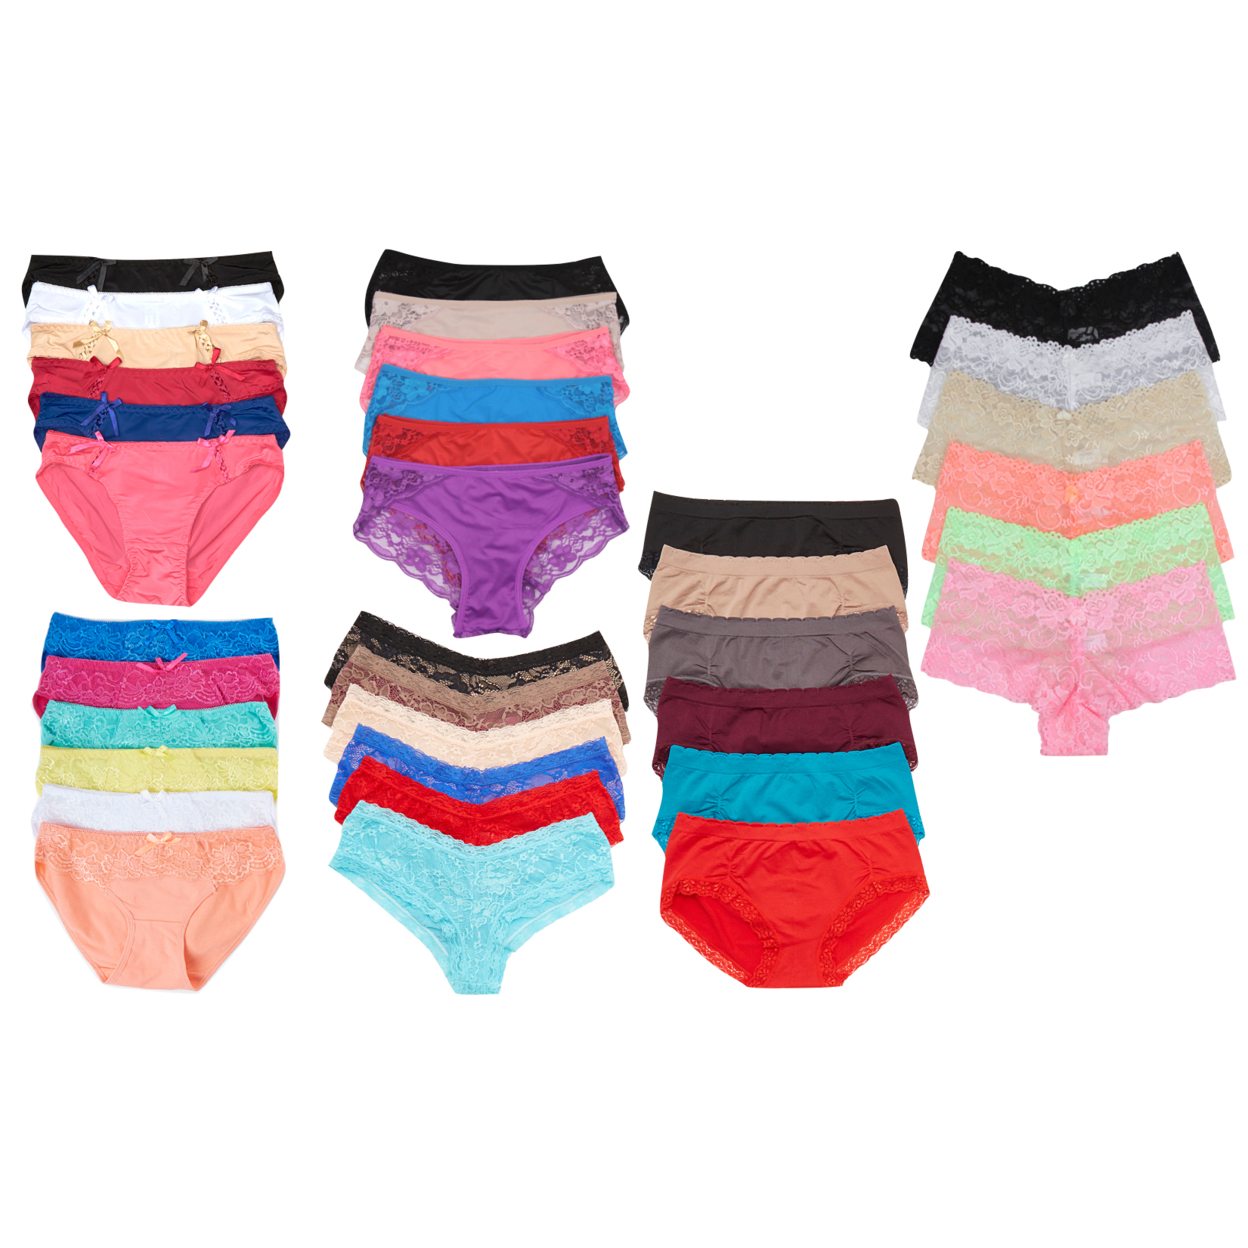 6 Pack Of Bikini Brief Panty Mystery Deal - Small